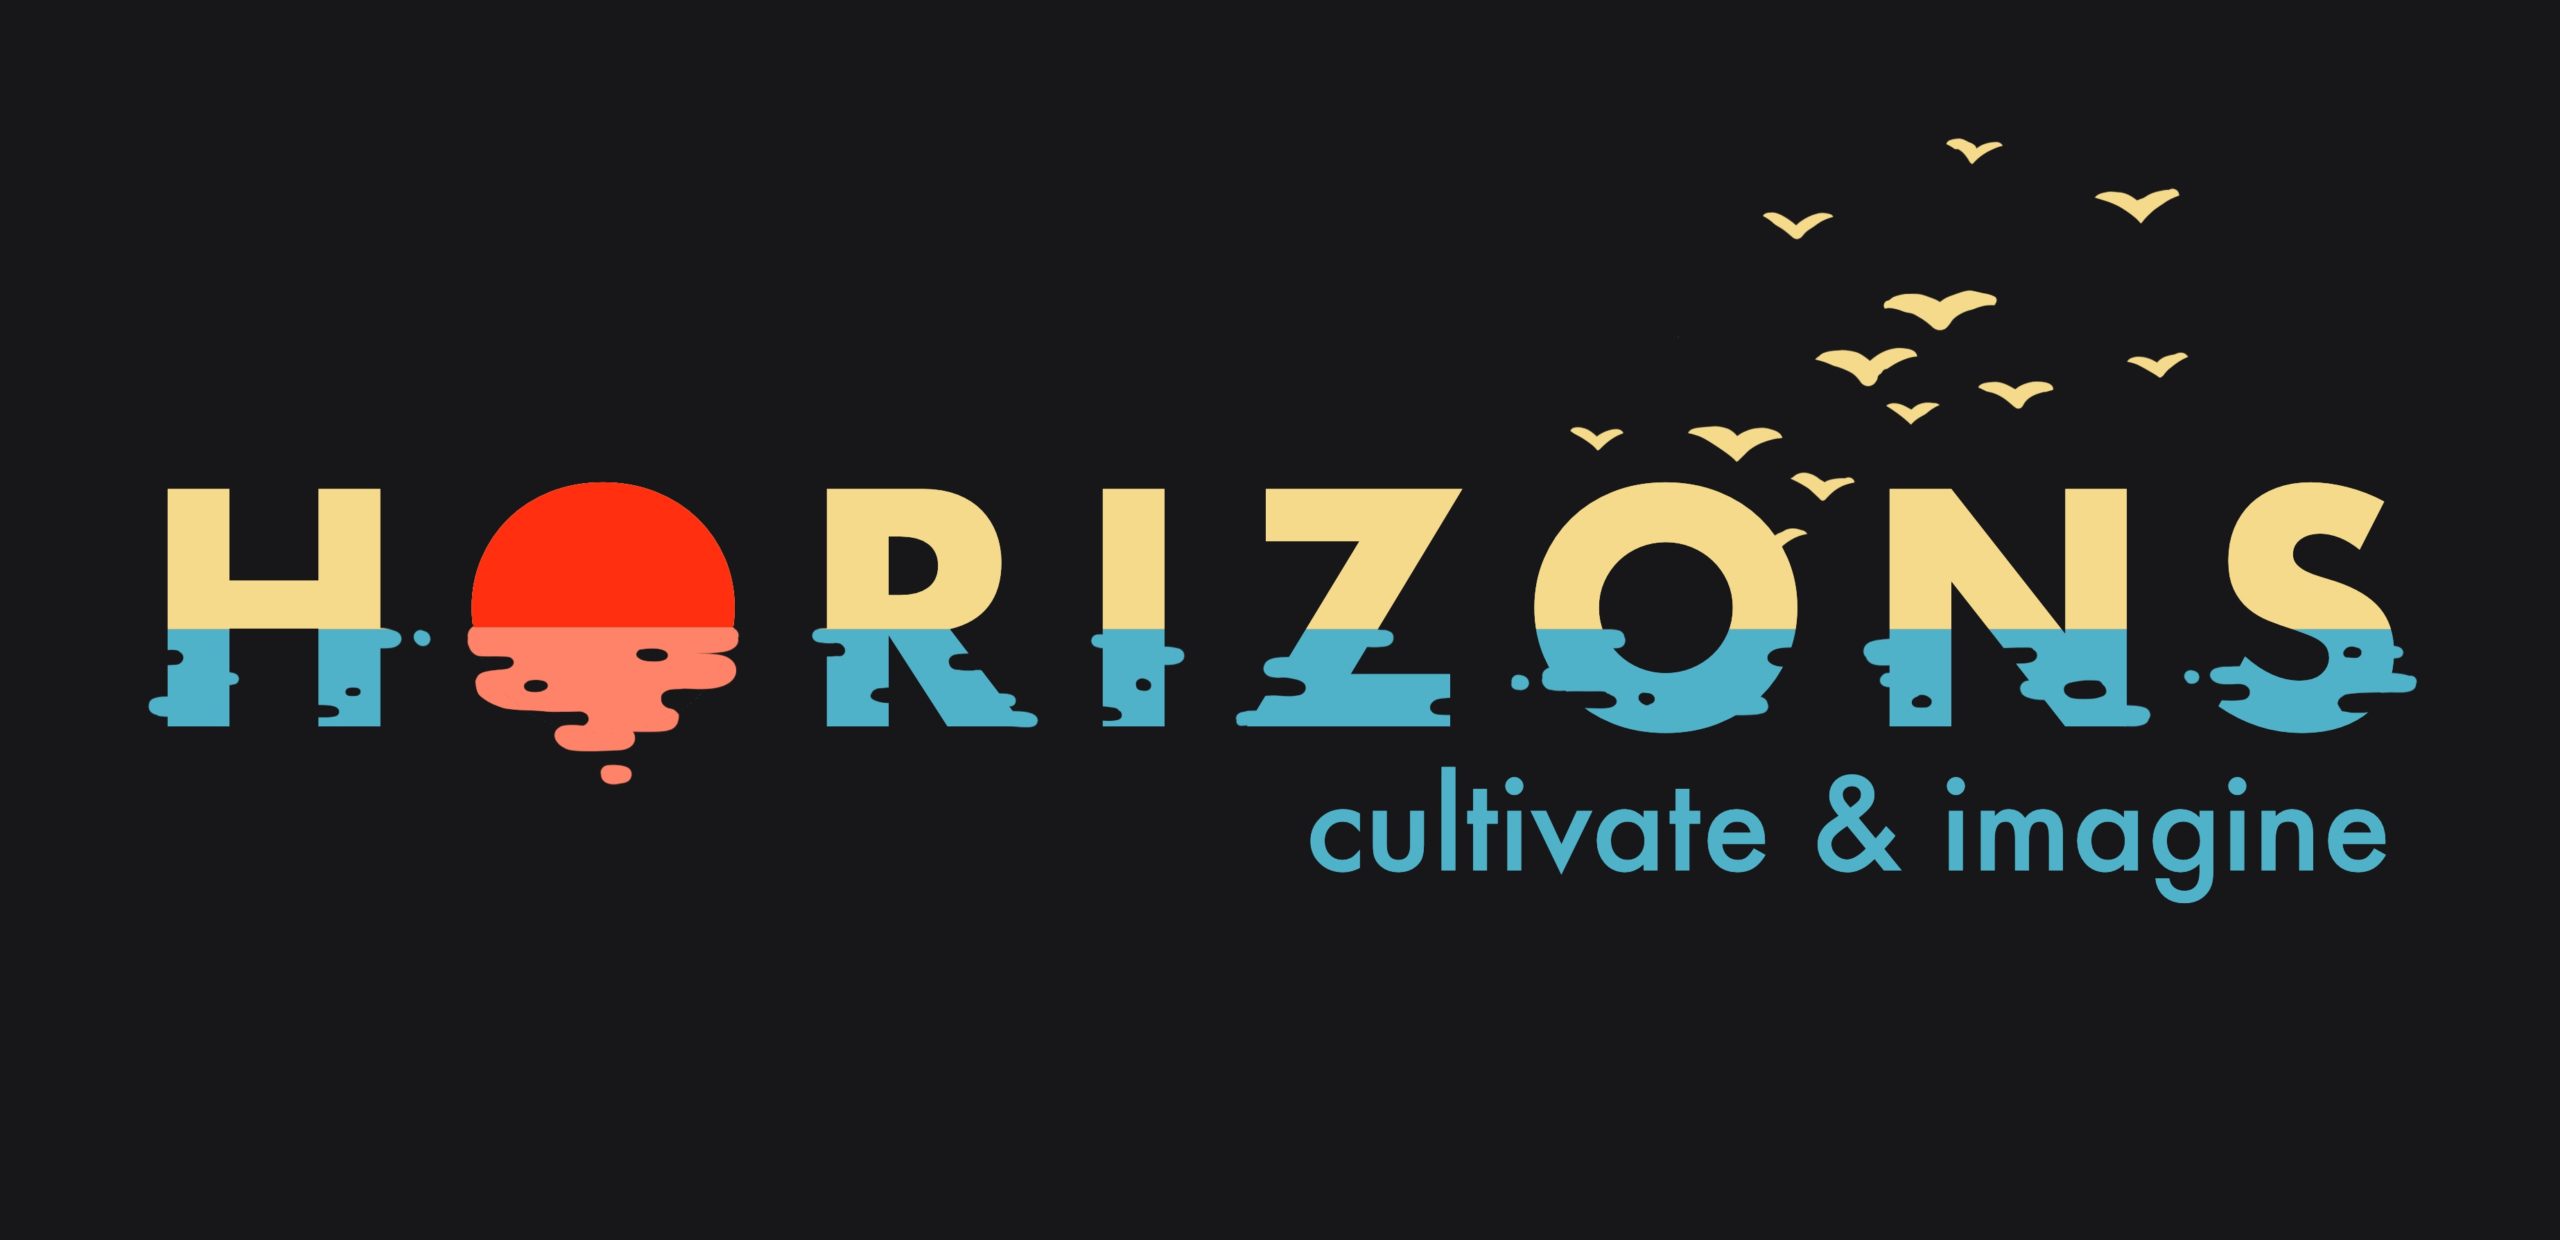 Black background with the word, "Horizons" written in bold, capital letters. The letters features a blue to yellow gradient that looks like light and water at the horizon. The only exception is the first "O" which is orange and red and mimics the sun. The second "O" has the outline of birds flying away from it. Cultivate and imagine is written below in lowercase blue letters.